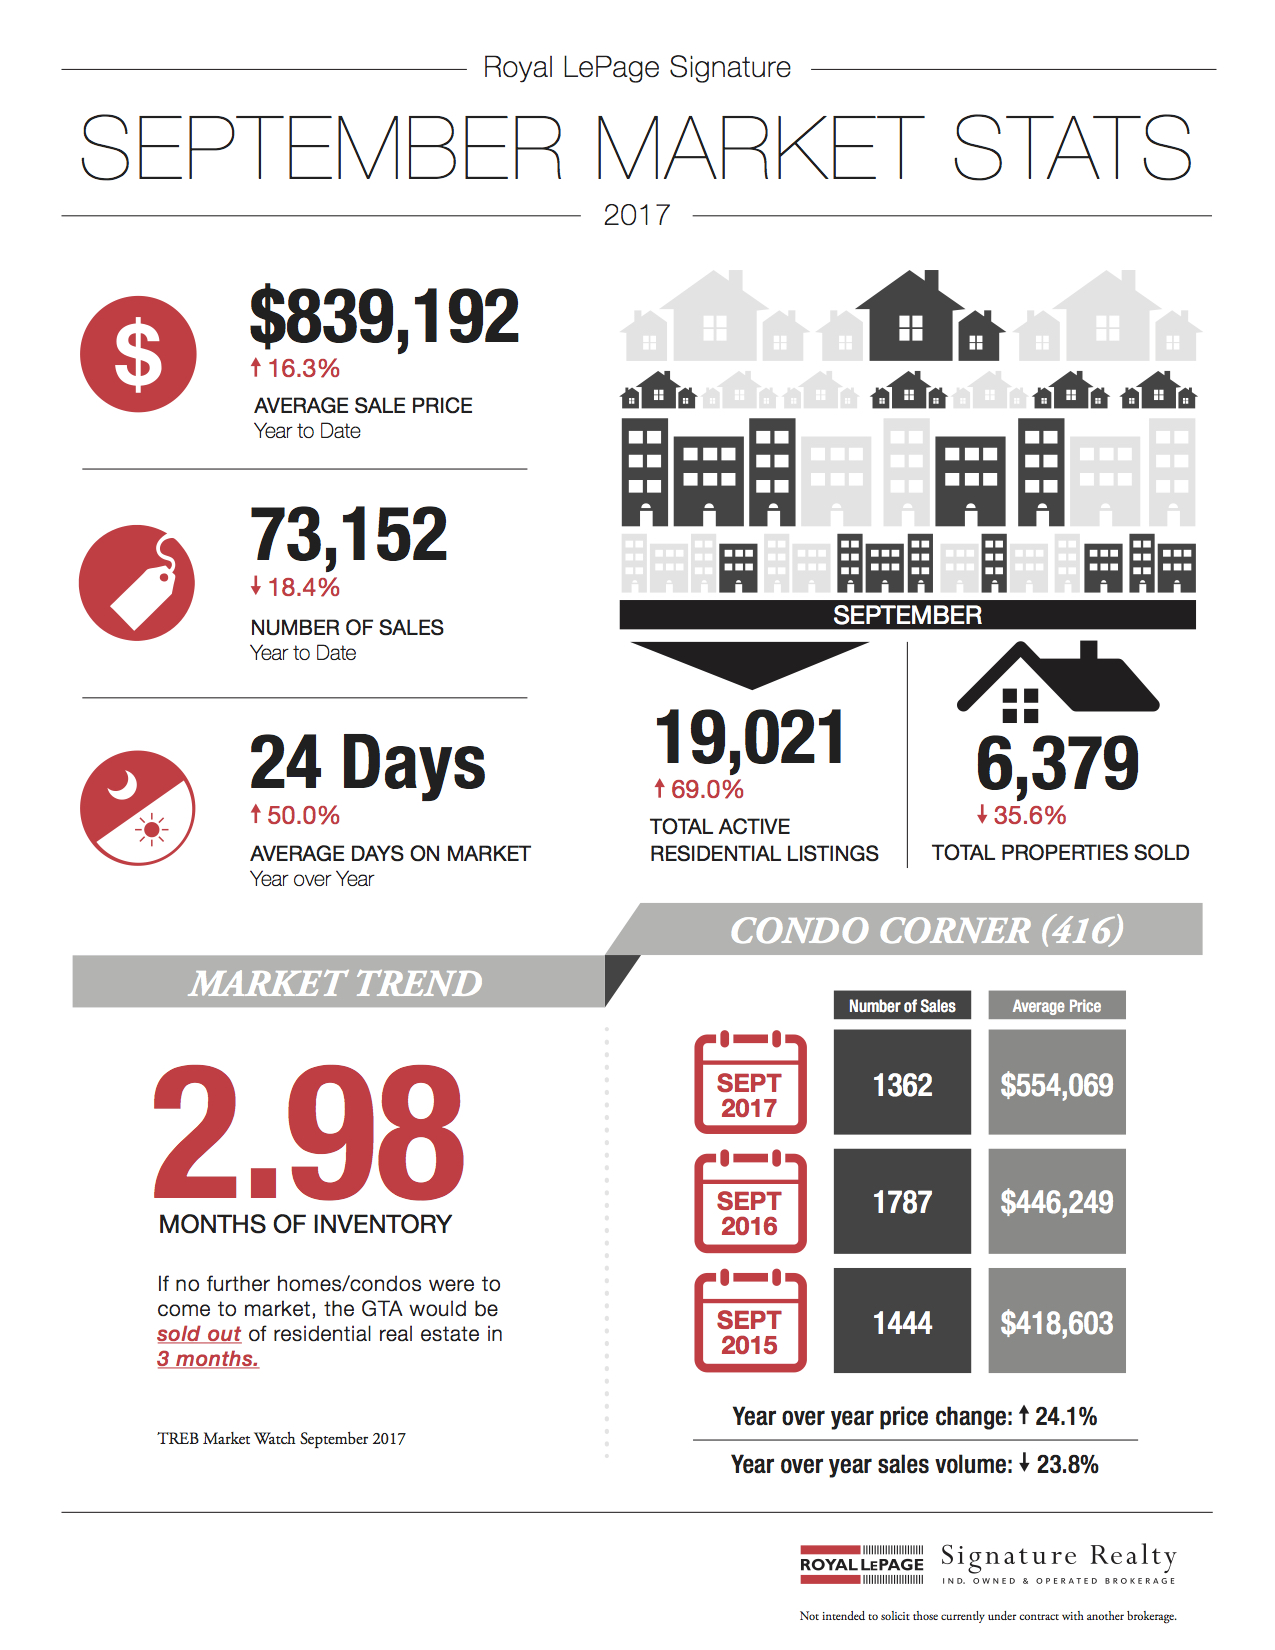 September 2017 Market Stats: Infographic & Report Photo